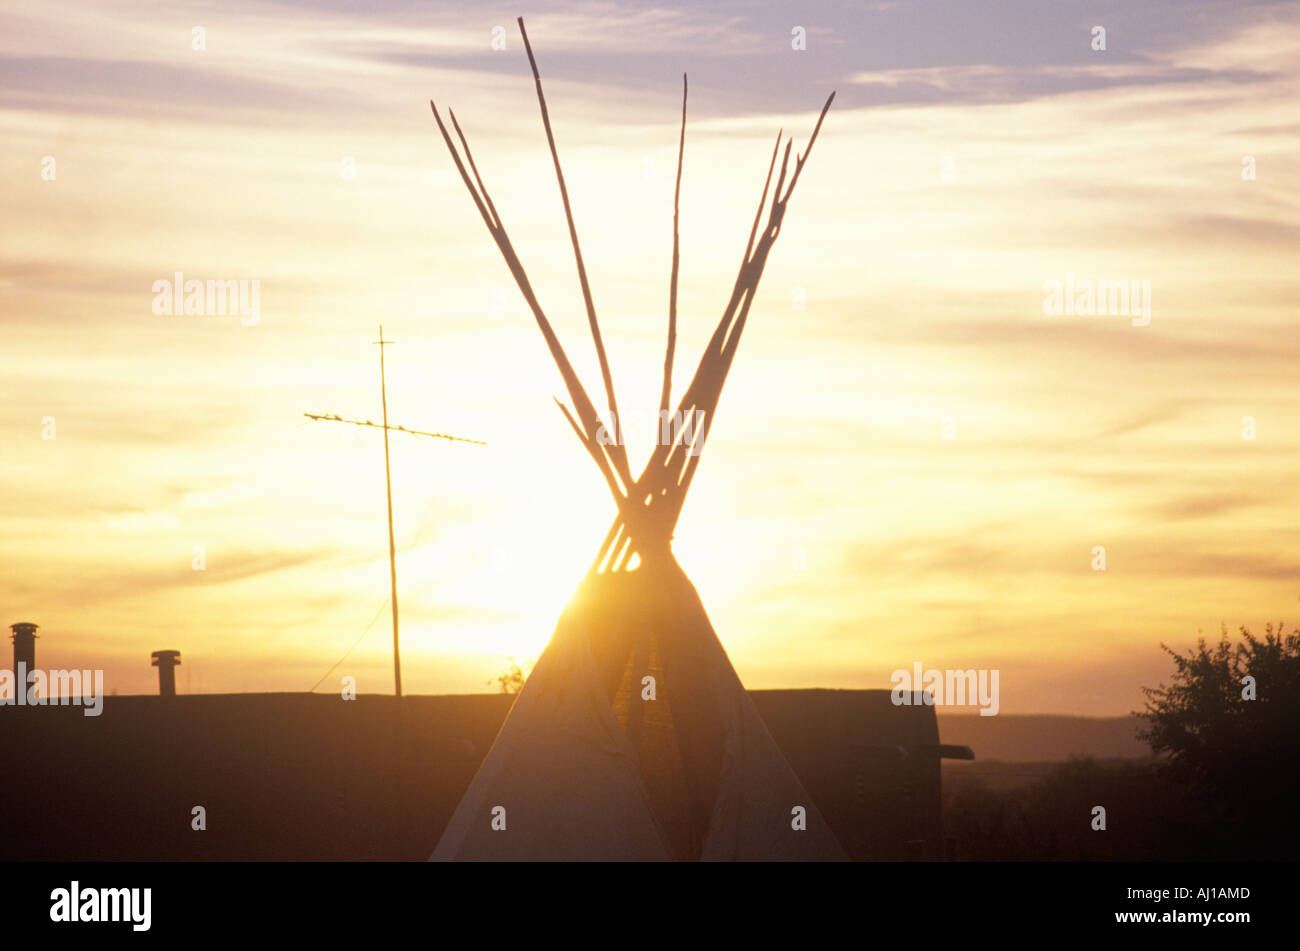 Teepee and cross silhouette on Indian reservation Stock Photo